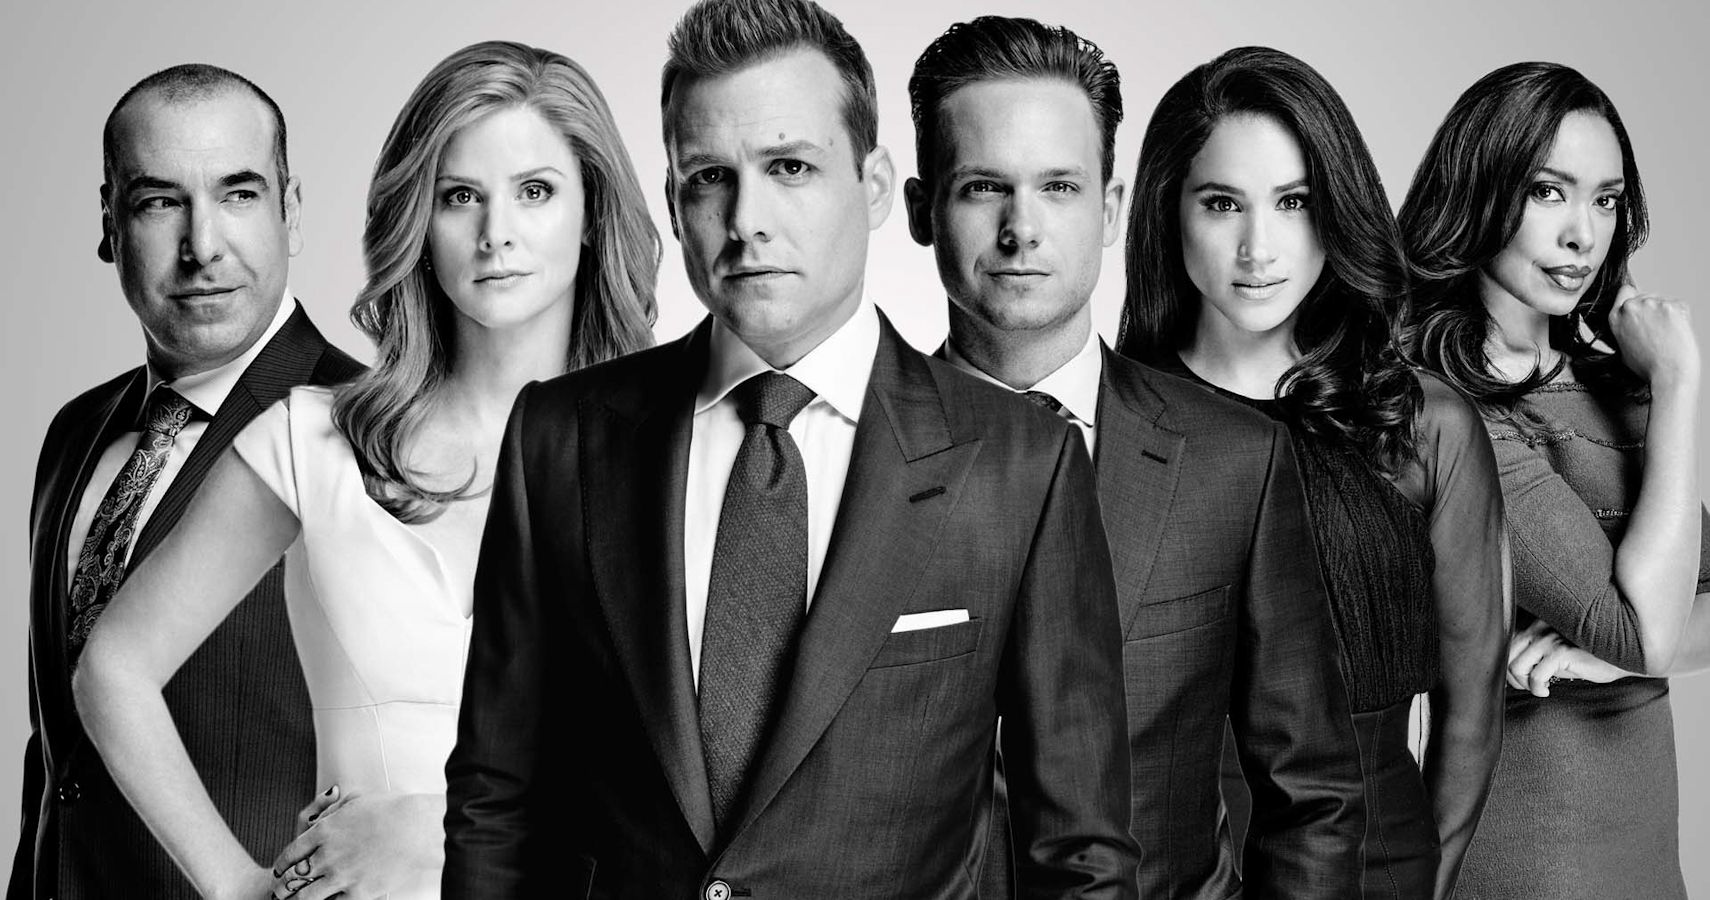 How Many Seasons of 'Suits' Did Meghan Markle Make?